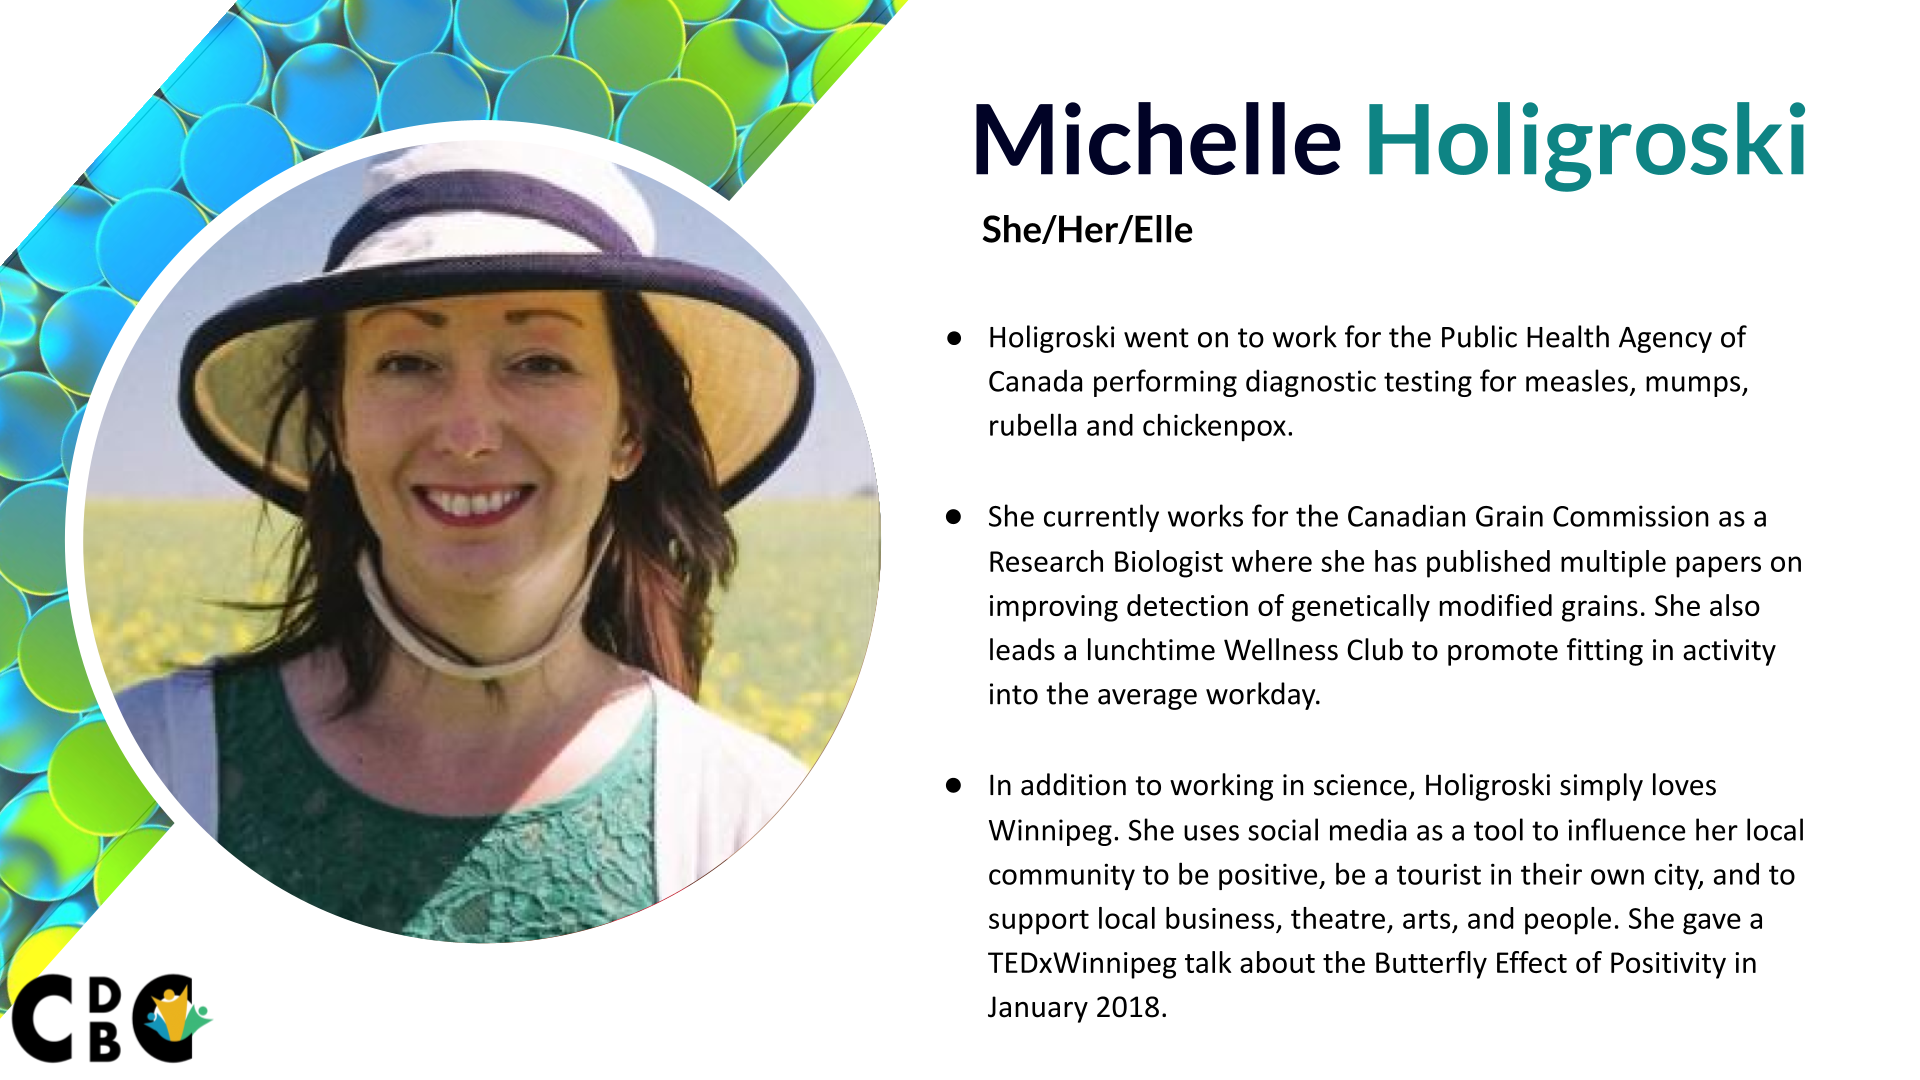 Michelle Holigroski (She/Her/Elle) Holigroski went on to work for the Public Health Agency of Canada performing diagnostic testing for measles, mumps, rubella and chickenpox. She currently works for the Canadian Grain Commission as a Research Biologist where she has published multiple papers on improving detection of genetically modified grains. She also leads a lunchtime Wellness Club to promote fitting in activity into the average workday. In addition to working in science, Holigroski simply loves Winnipeg. She uses social media as a tool to influence her local community to be positive, be a tourist in their own city, and to support local business, theatre, arts, and people. She gave a TEDxWinnipeg talk about the Butterfly Effect of Positivity in January 2018.